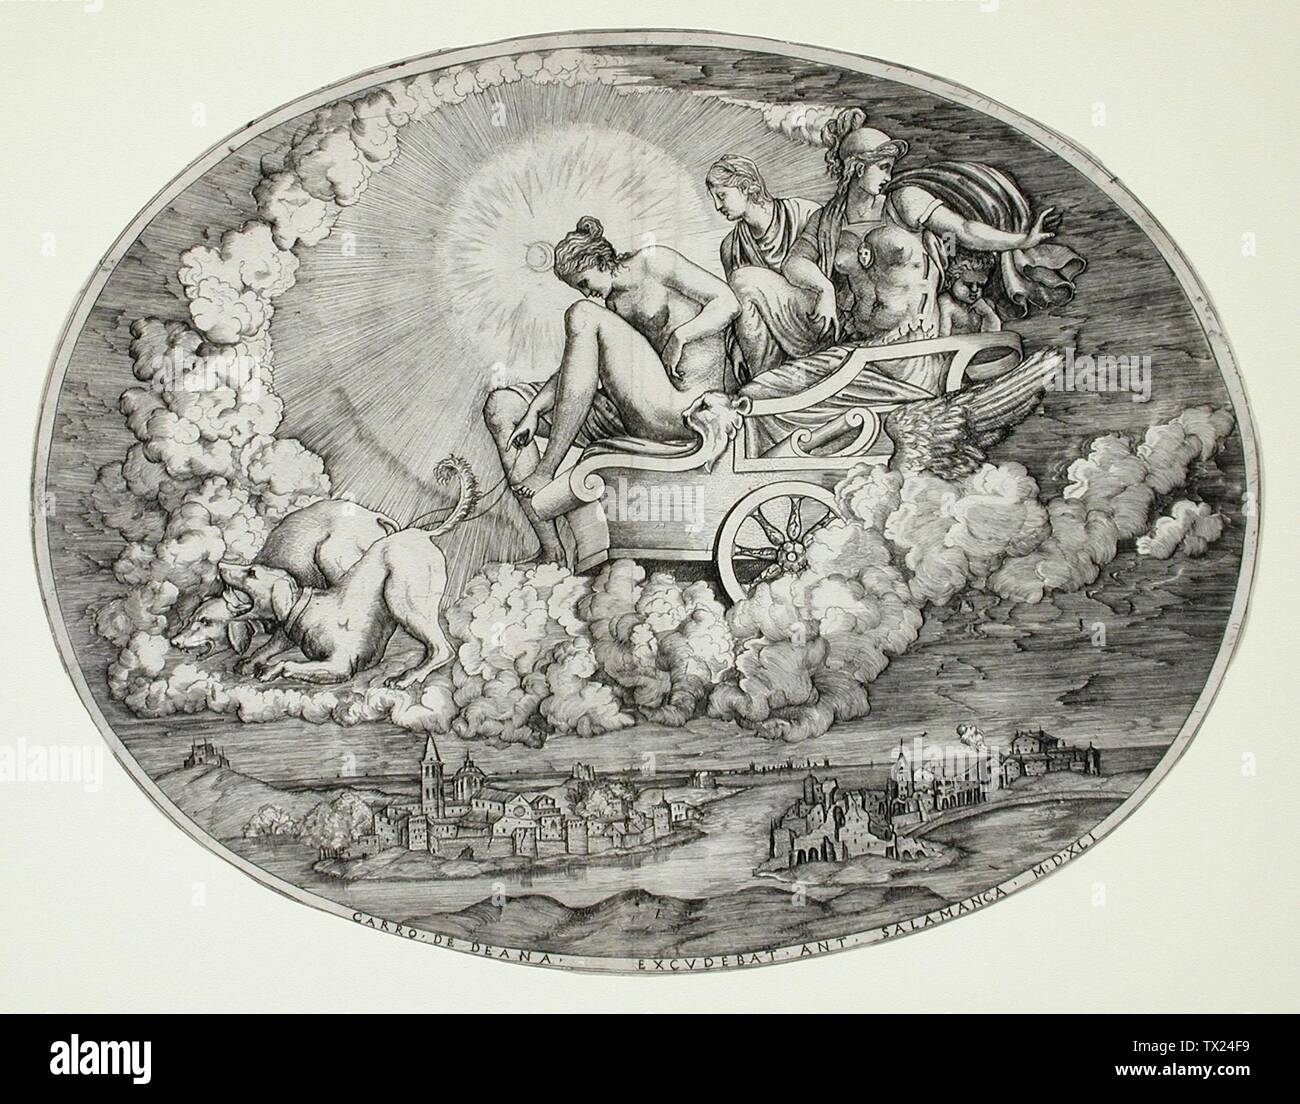 Diana and Her Chariot;  Italy, printed 1541 Prints; engravings Engraving Sheet: 11 7/8 x 15 1/2 in. (30.16 x 39.37 cm) oval Mary Stansbury Ruiz Bequest (M.88.91.198) Prints and Drawings; Printed 1541; Stock Photo